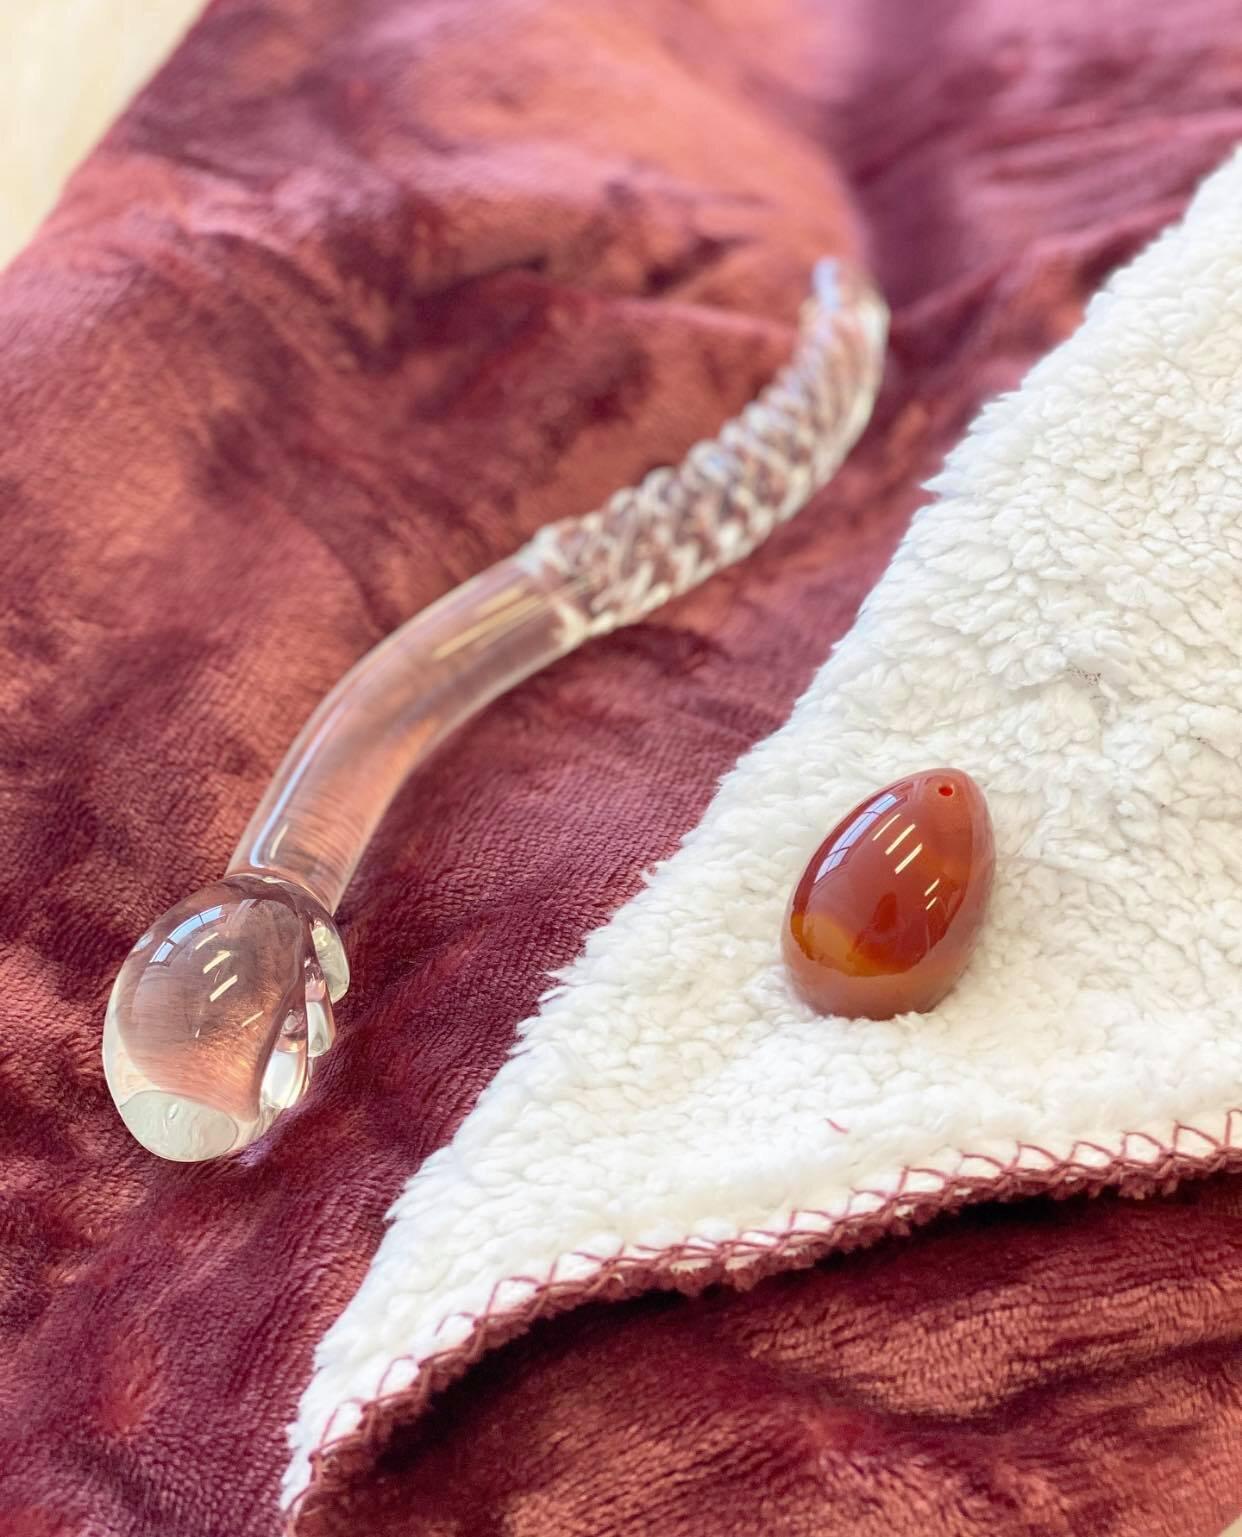 Cervix Moon kit includes waterproof blanket in moon blood red, red carnelian crystal yoni egg and clear glass cervix serpent pleasure wand. 